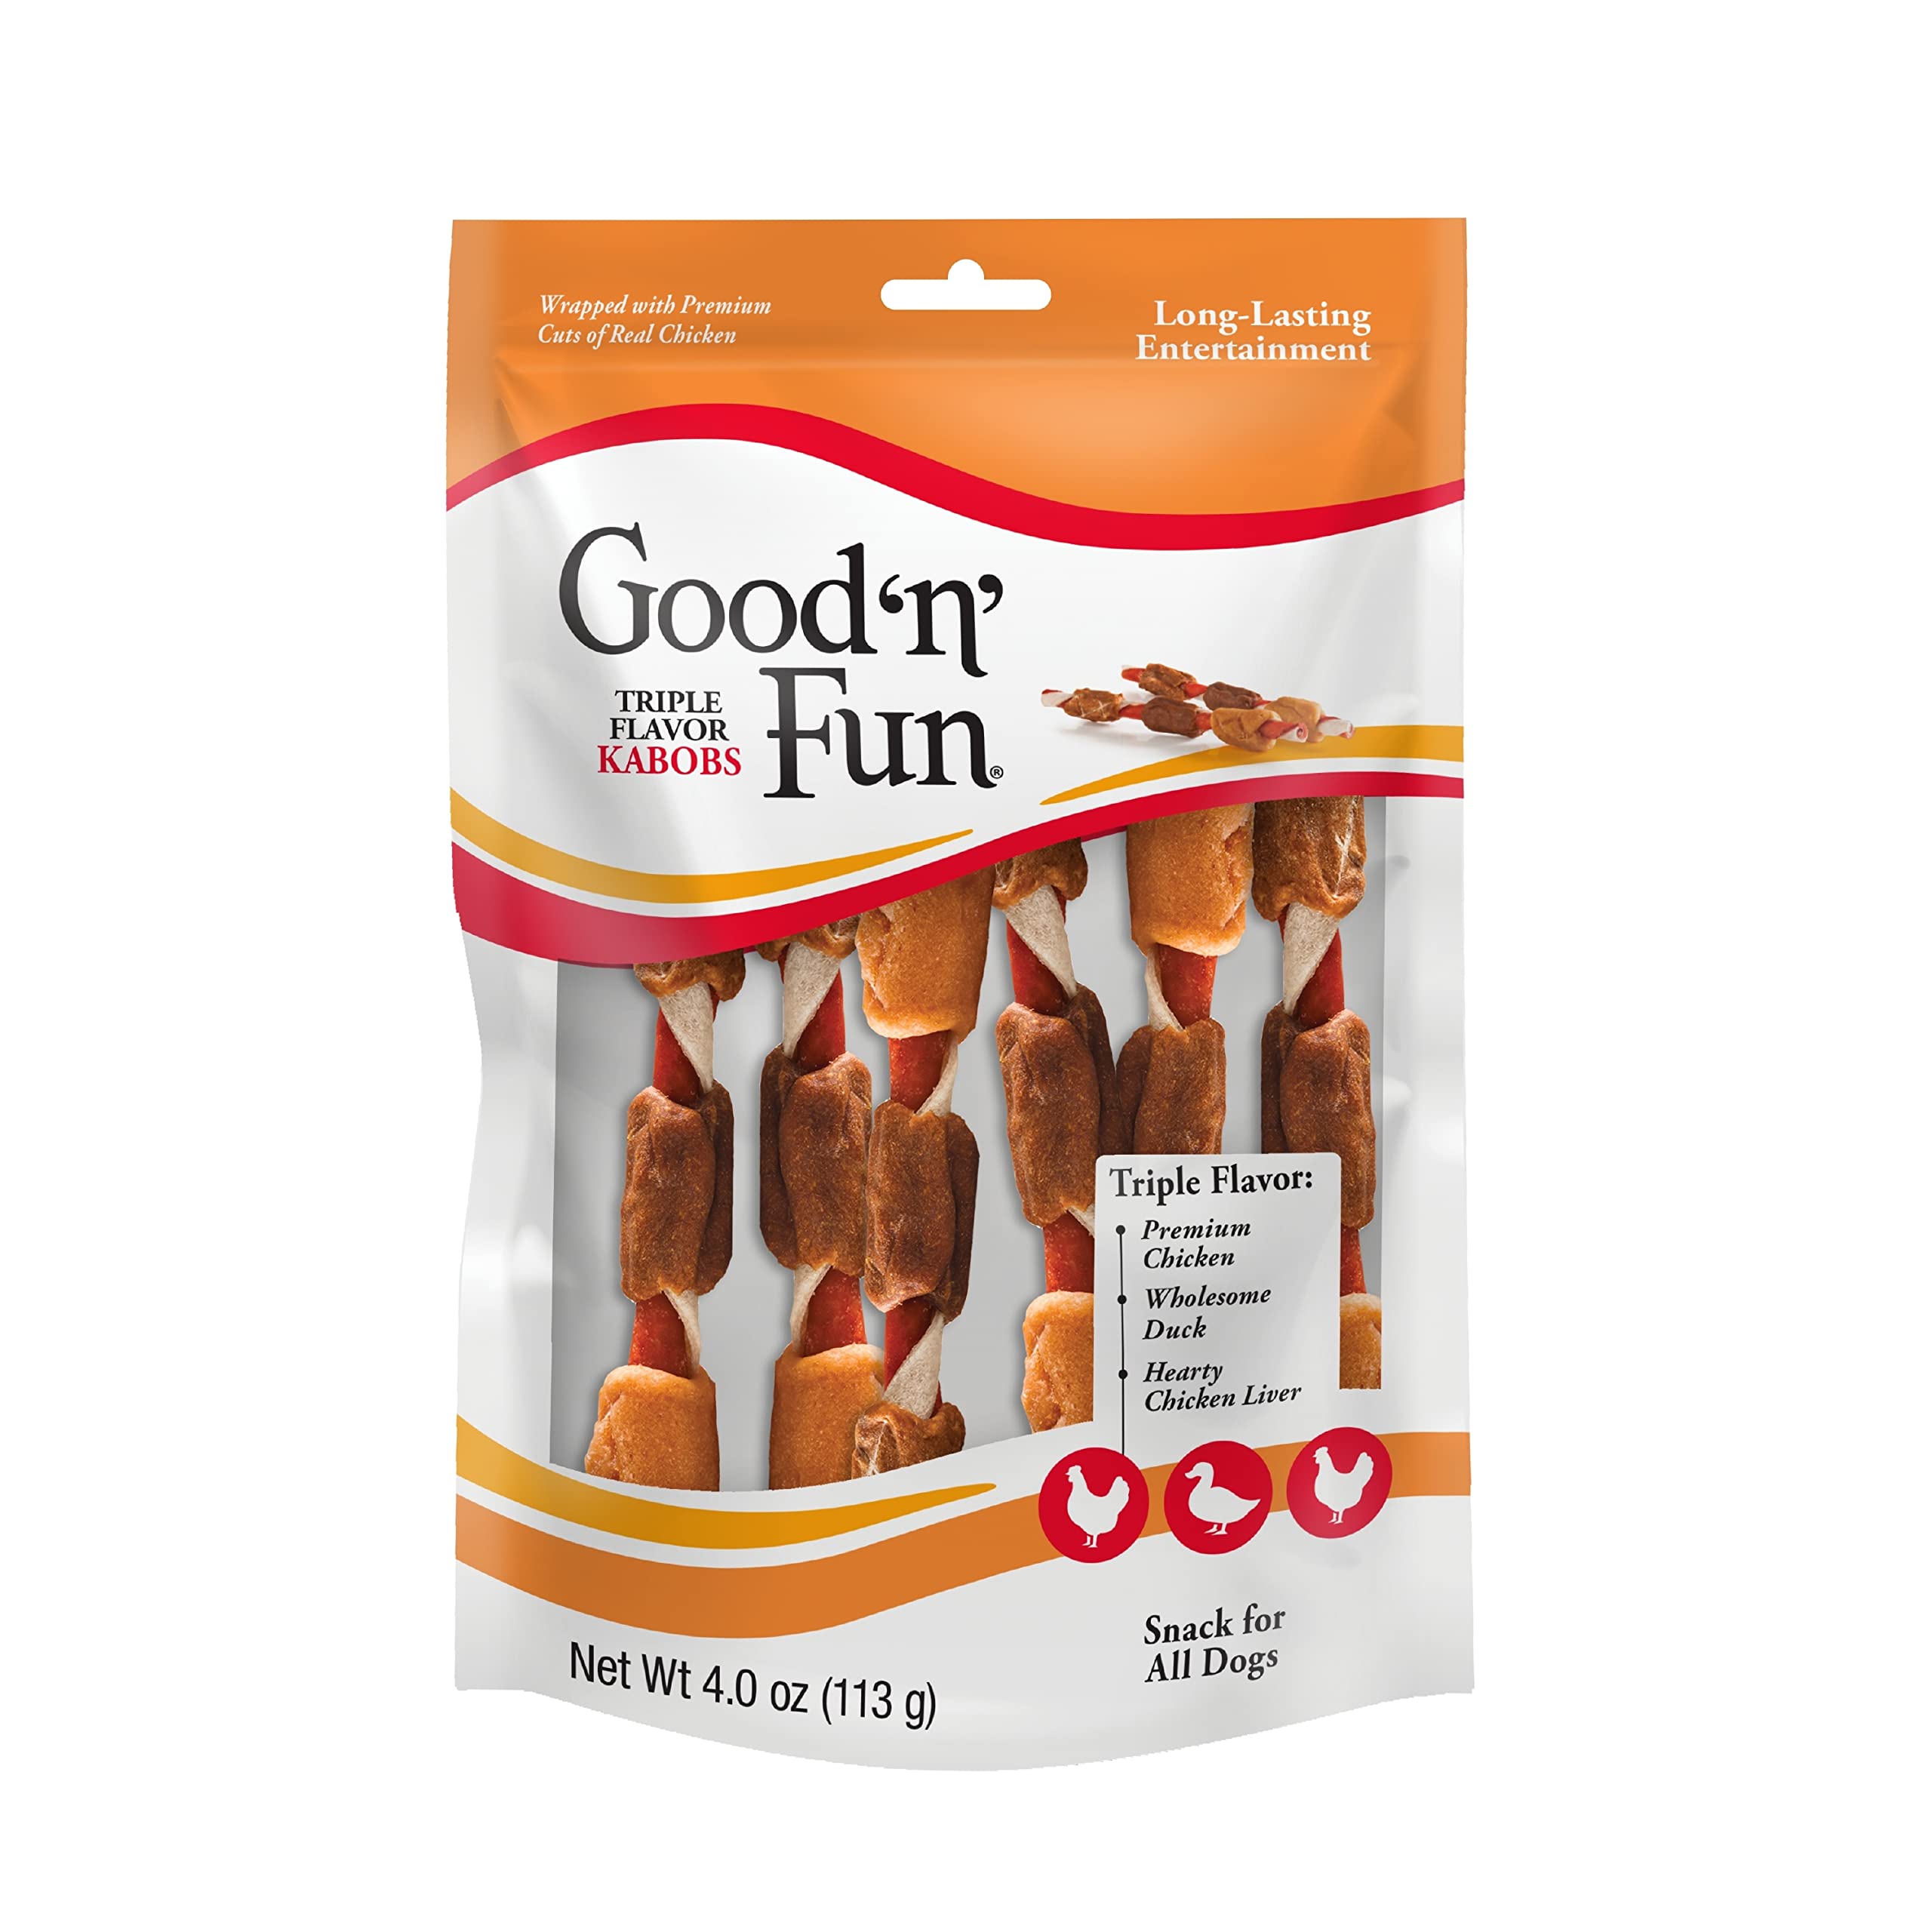 Good'n'Fun Triple Flavored Rawhide Kabobs for Dogs, Treat Your Dog